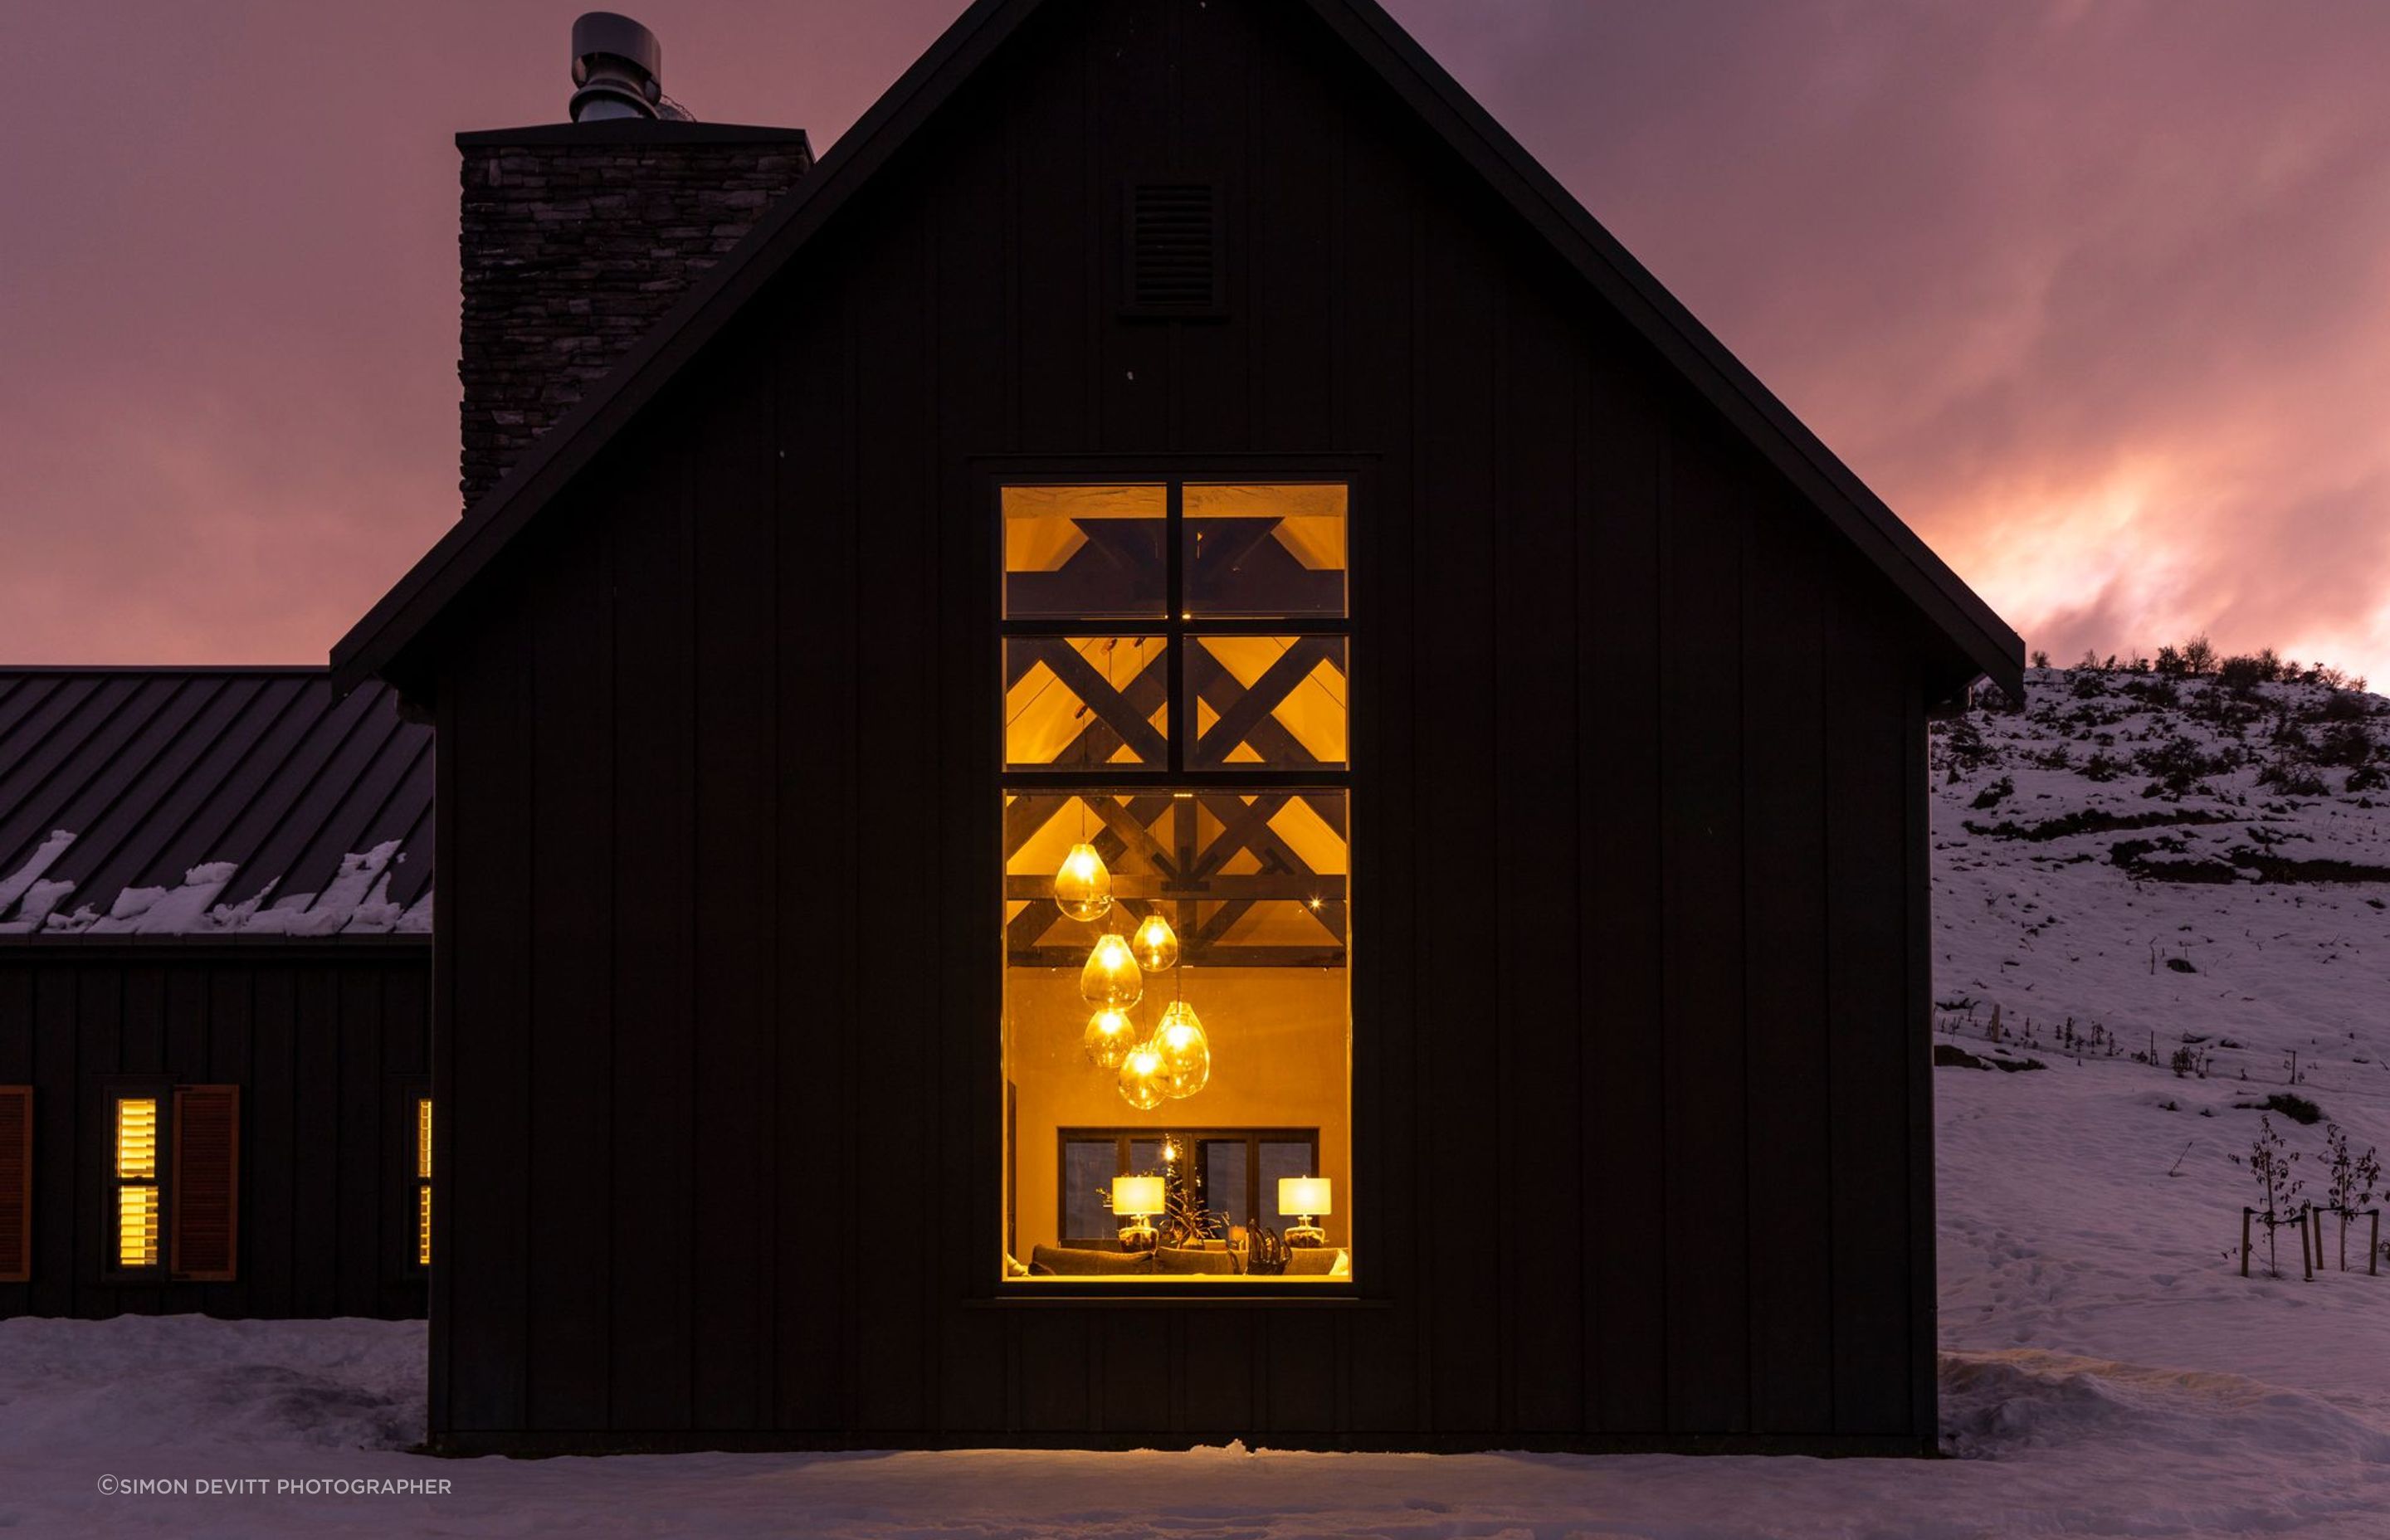 “At night, when you look from the road, the house glows through that big window, it is quite beautiful.”